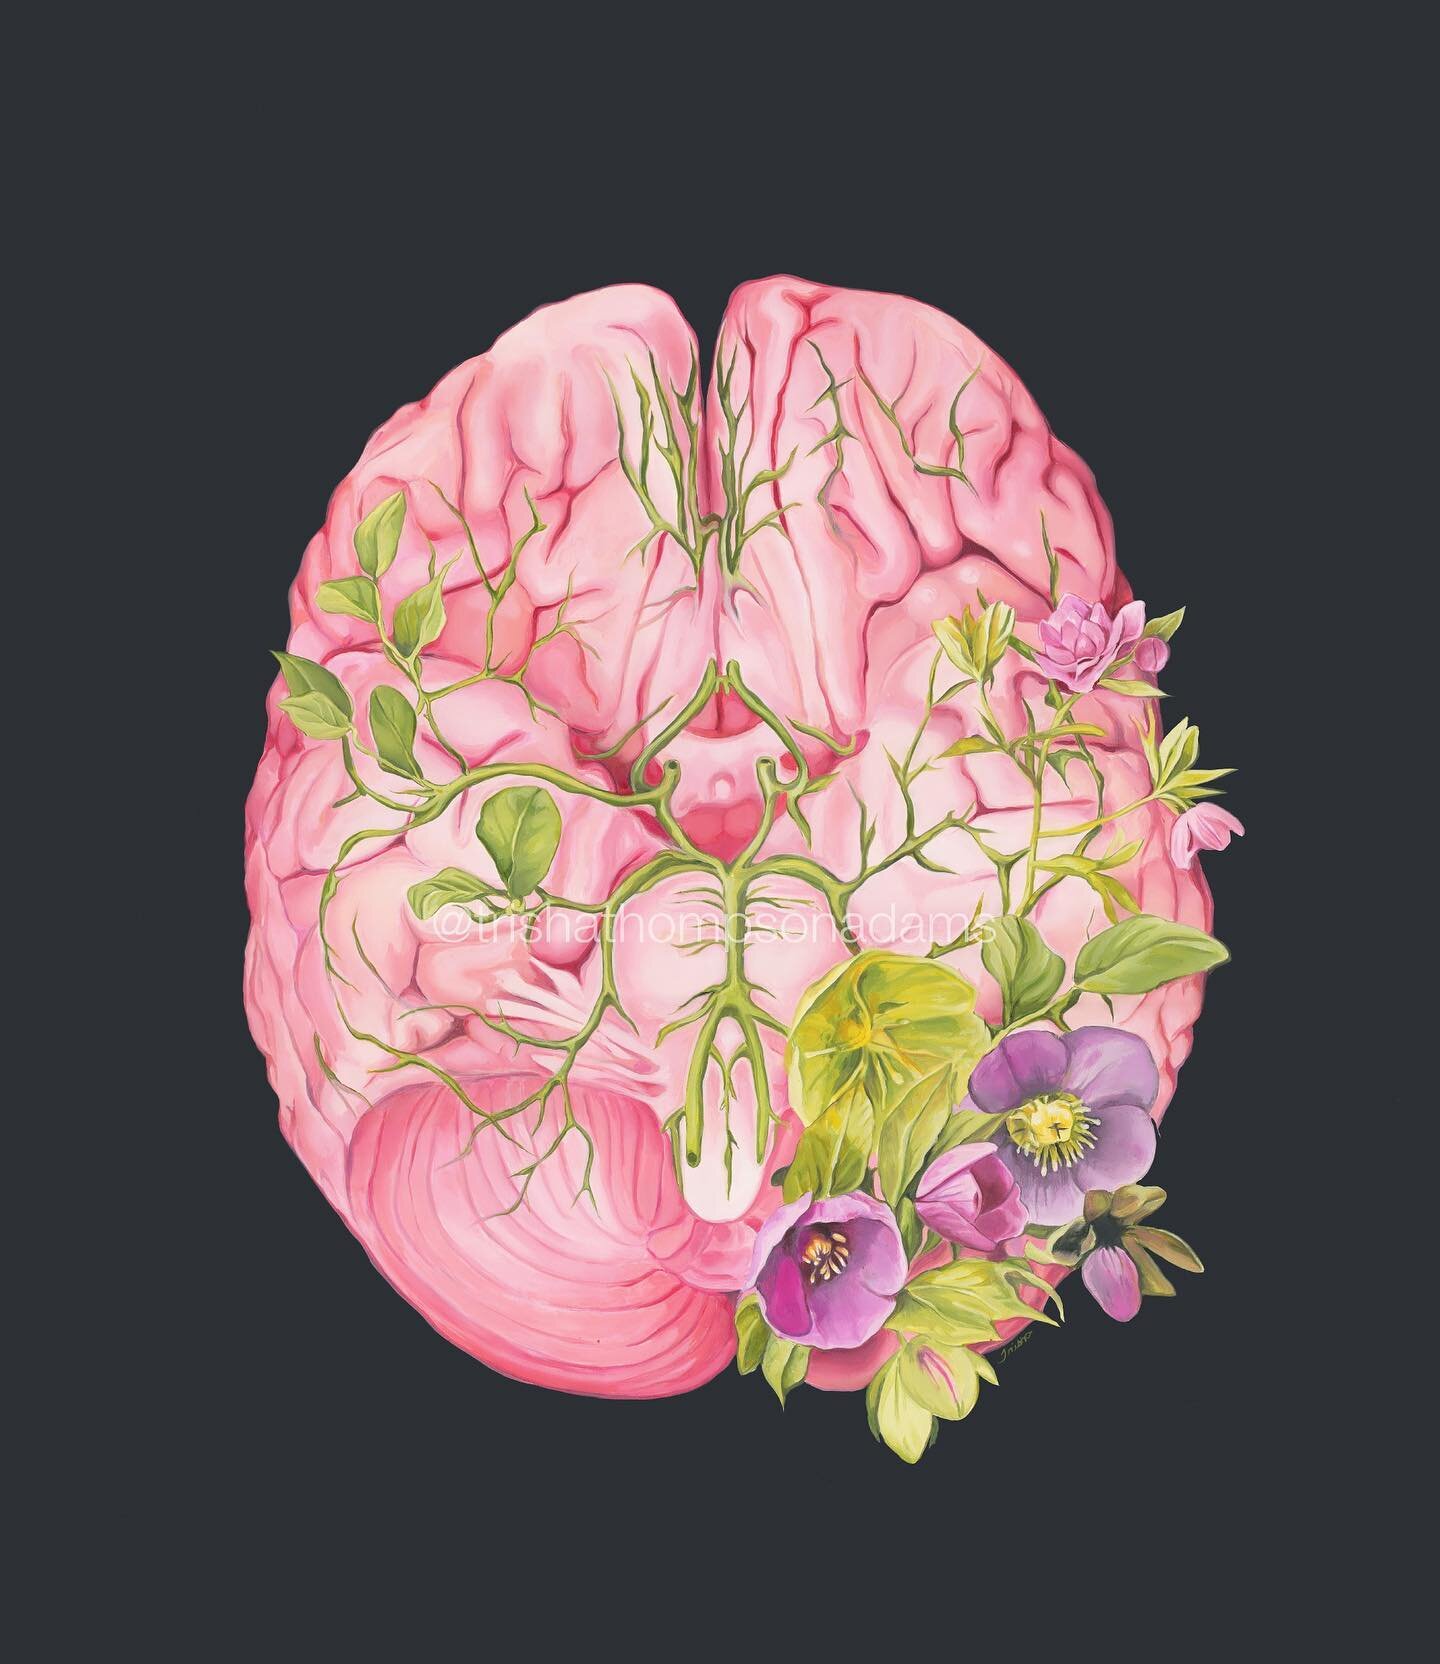 ✨New✨ Floral Brain II oil painting 2022. Thanks so much for your patience while getting these new pieces out 🙏🏼 Prints up on the site ☺️ 

#oilpainting #brain #brainhealth #brainart #floralanatomy #anatomy #anatomicalart #floralbrain #beautifulbiza